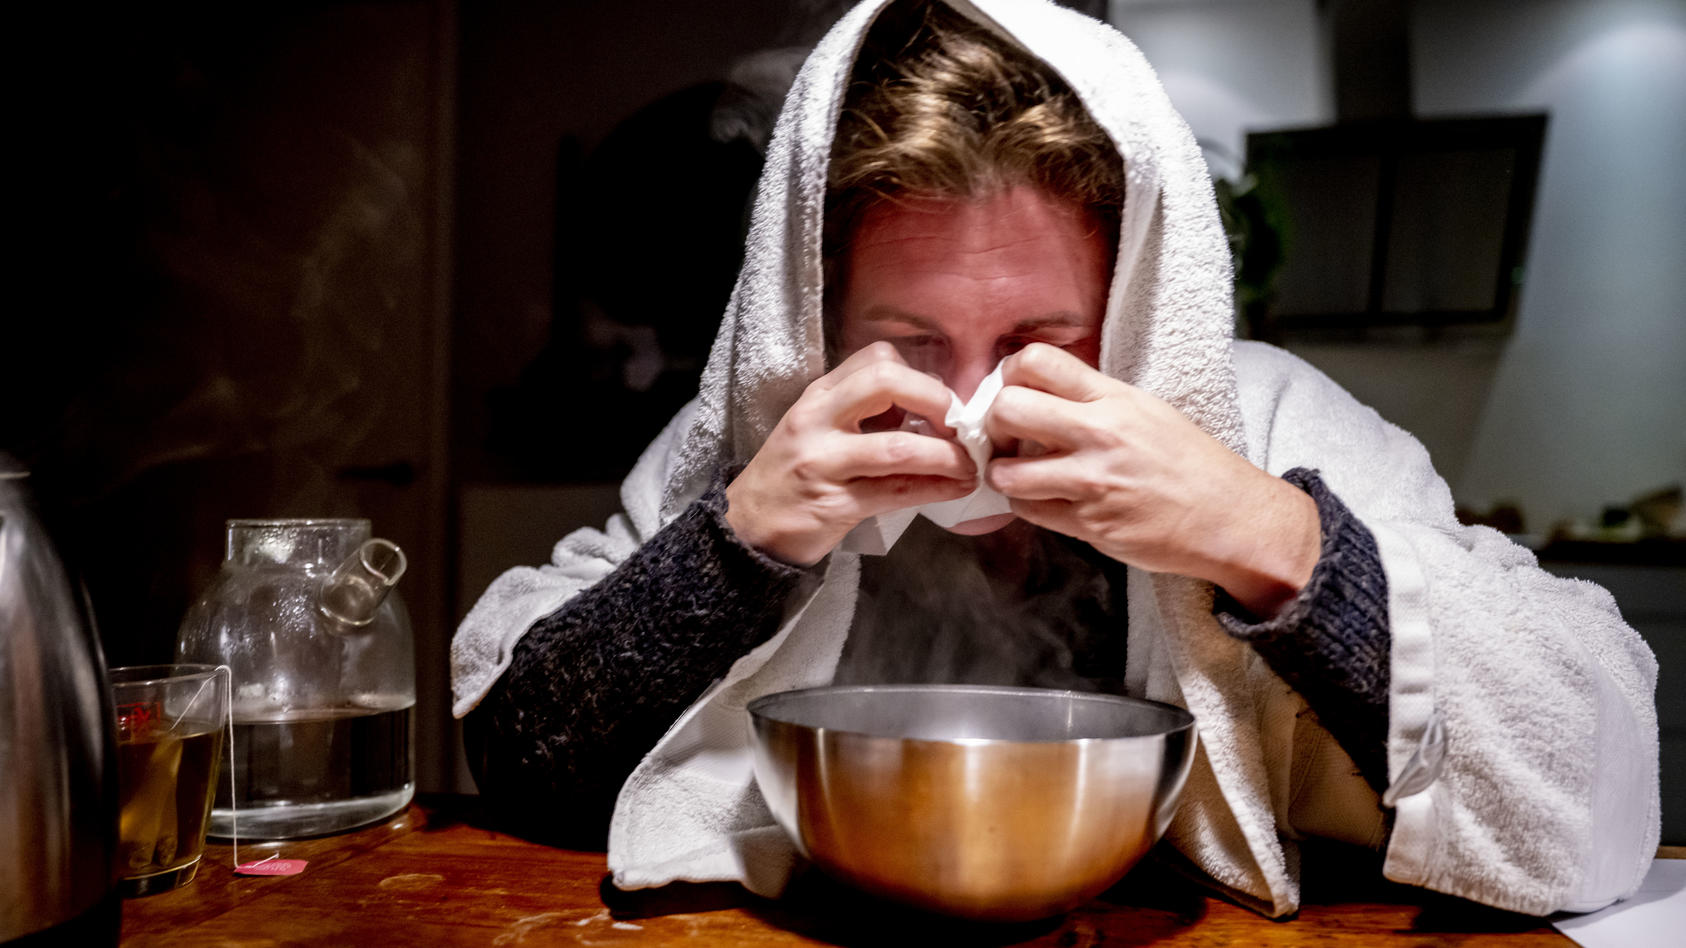 THE HAGUE -A woman with flu is steaming. The number of people with flu has risen to such an extent that it is now officially an epidemic. The National Institute for Public Health and the Environment (RIVM) informs Robin UtrechtTHE HAGUE -A woman with